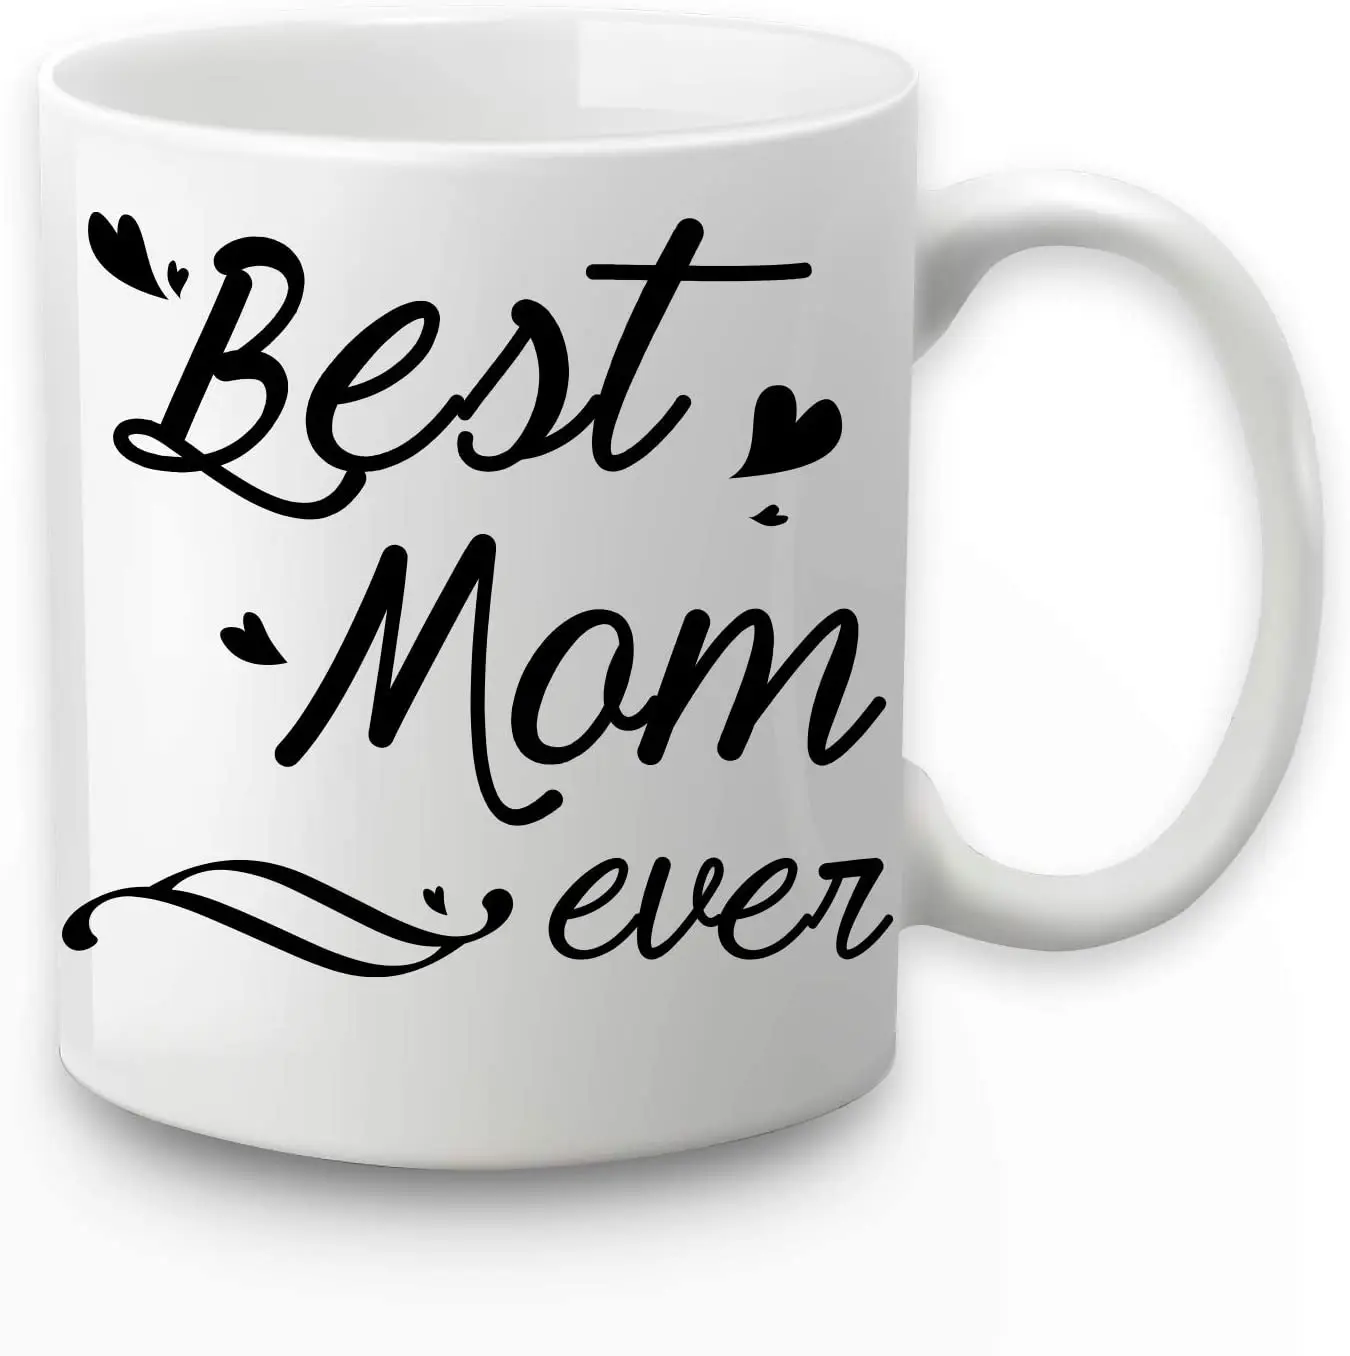 Free Shipping Mother's Day Gift Mug Coffee Cups Best Mom Ever Ceramic Tea Cup 